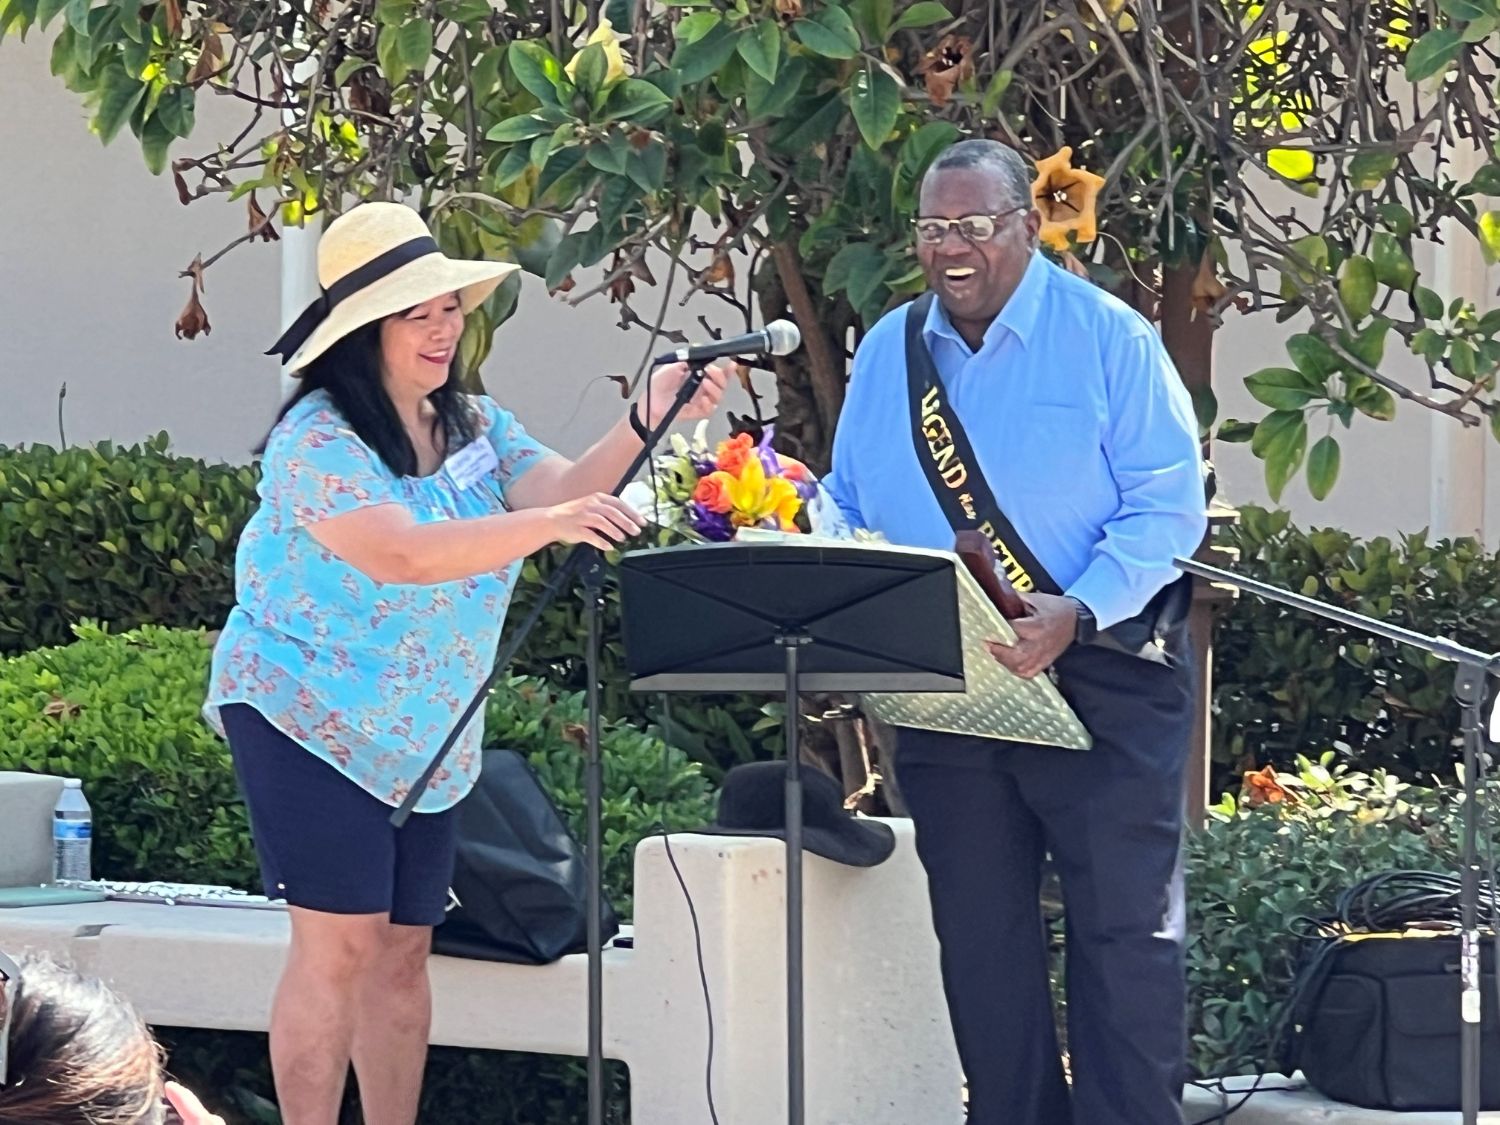 PHOTO: provided by Lauren Black | The South Pasadenan | Helena Yee, left, was part of the SPHS Music Boosters from 2014 to 2021. She’s alongside Howard Crawford, the SPHS band director, who said he was deeply honored by the retirement recognition.